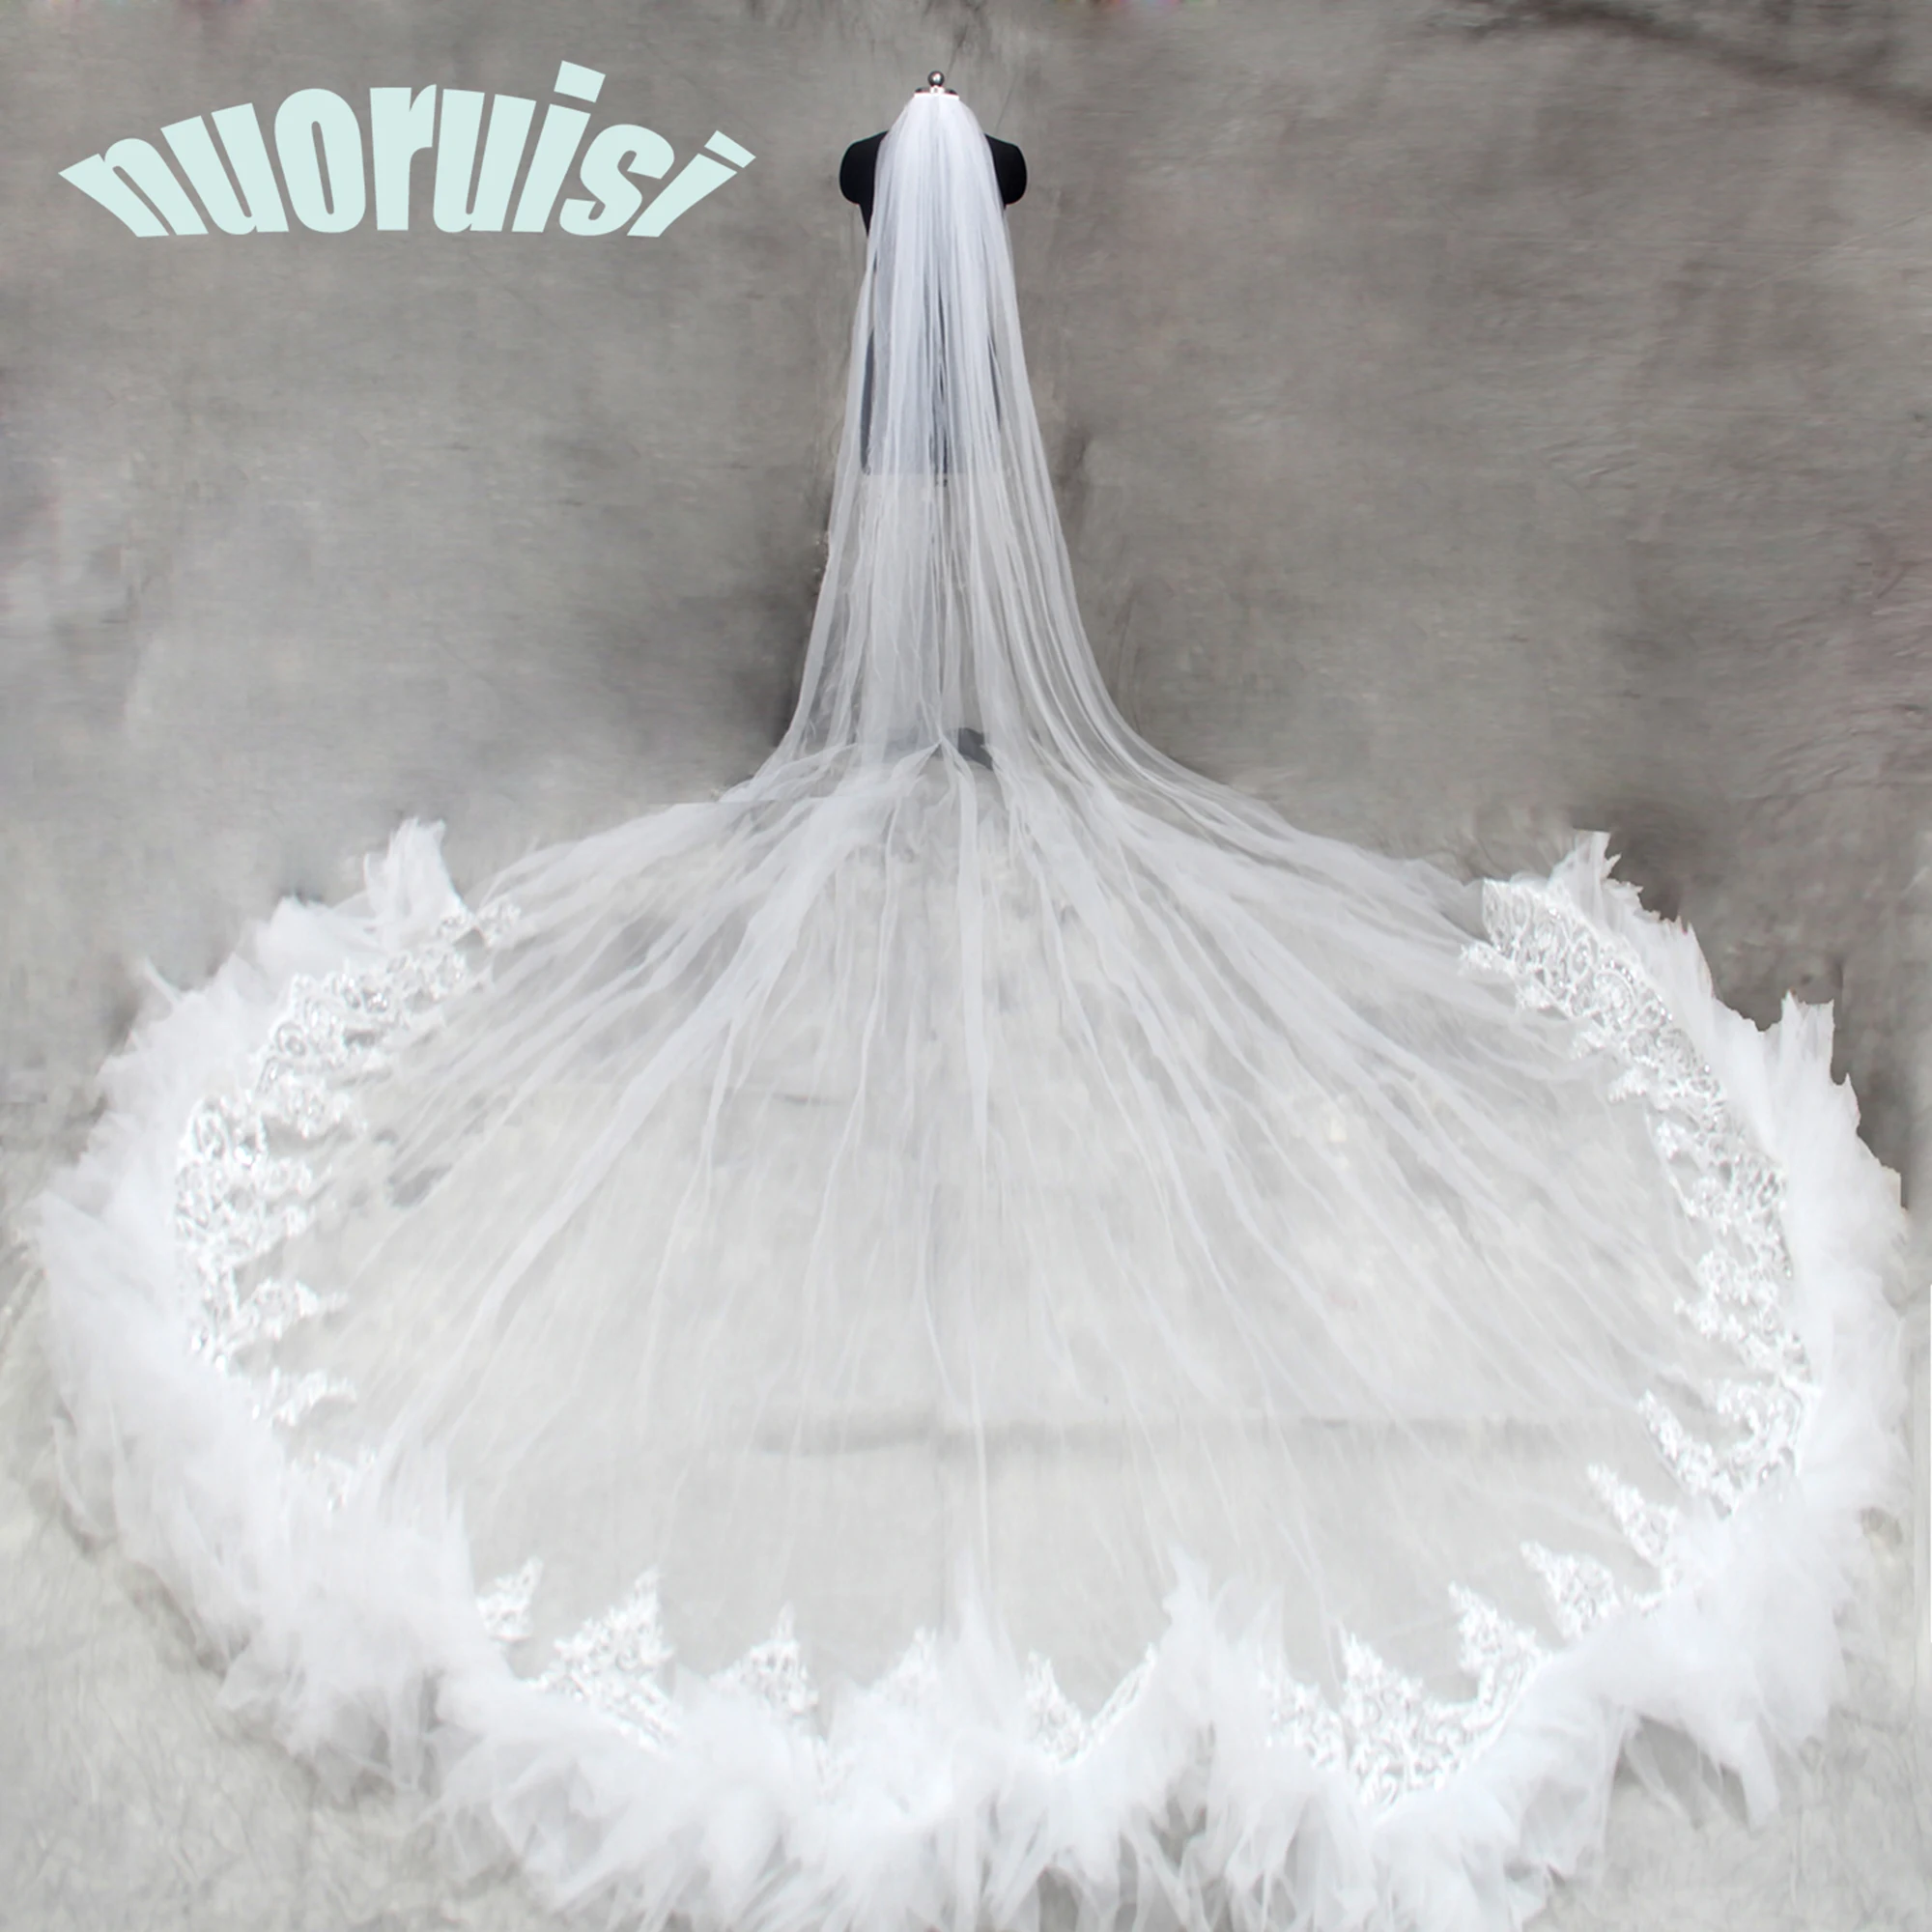 

Long Lace Wedding Veil 3 Meters Long White Ivory Cathedral Bridal Veil with Comb Wedding Accessories Bride Headpieces